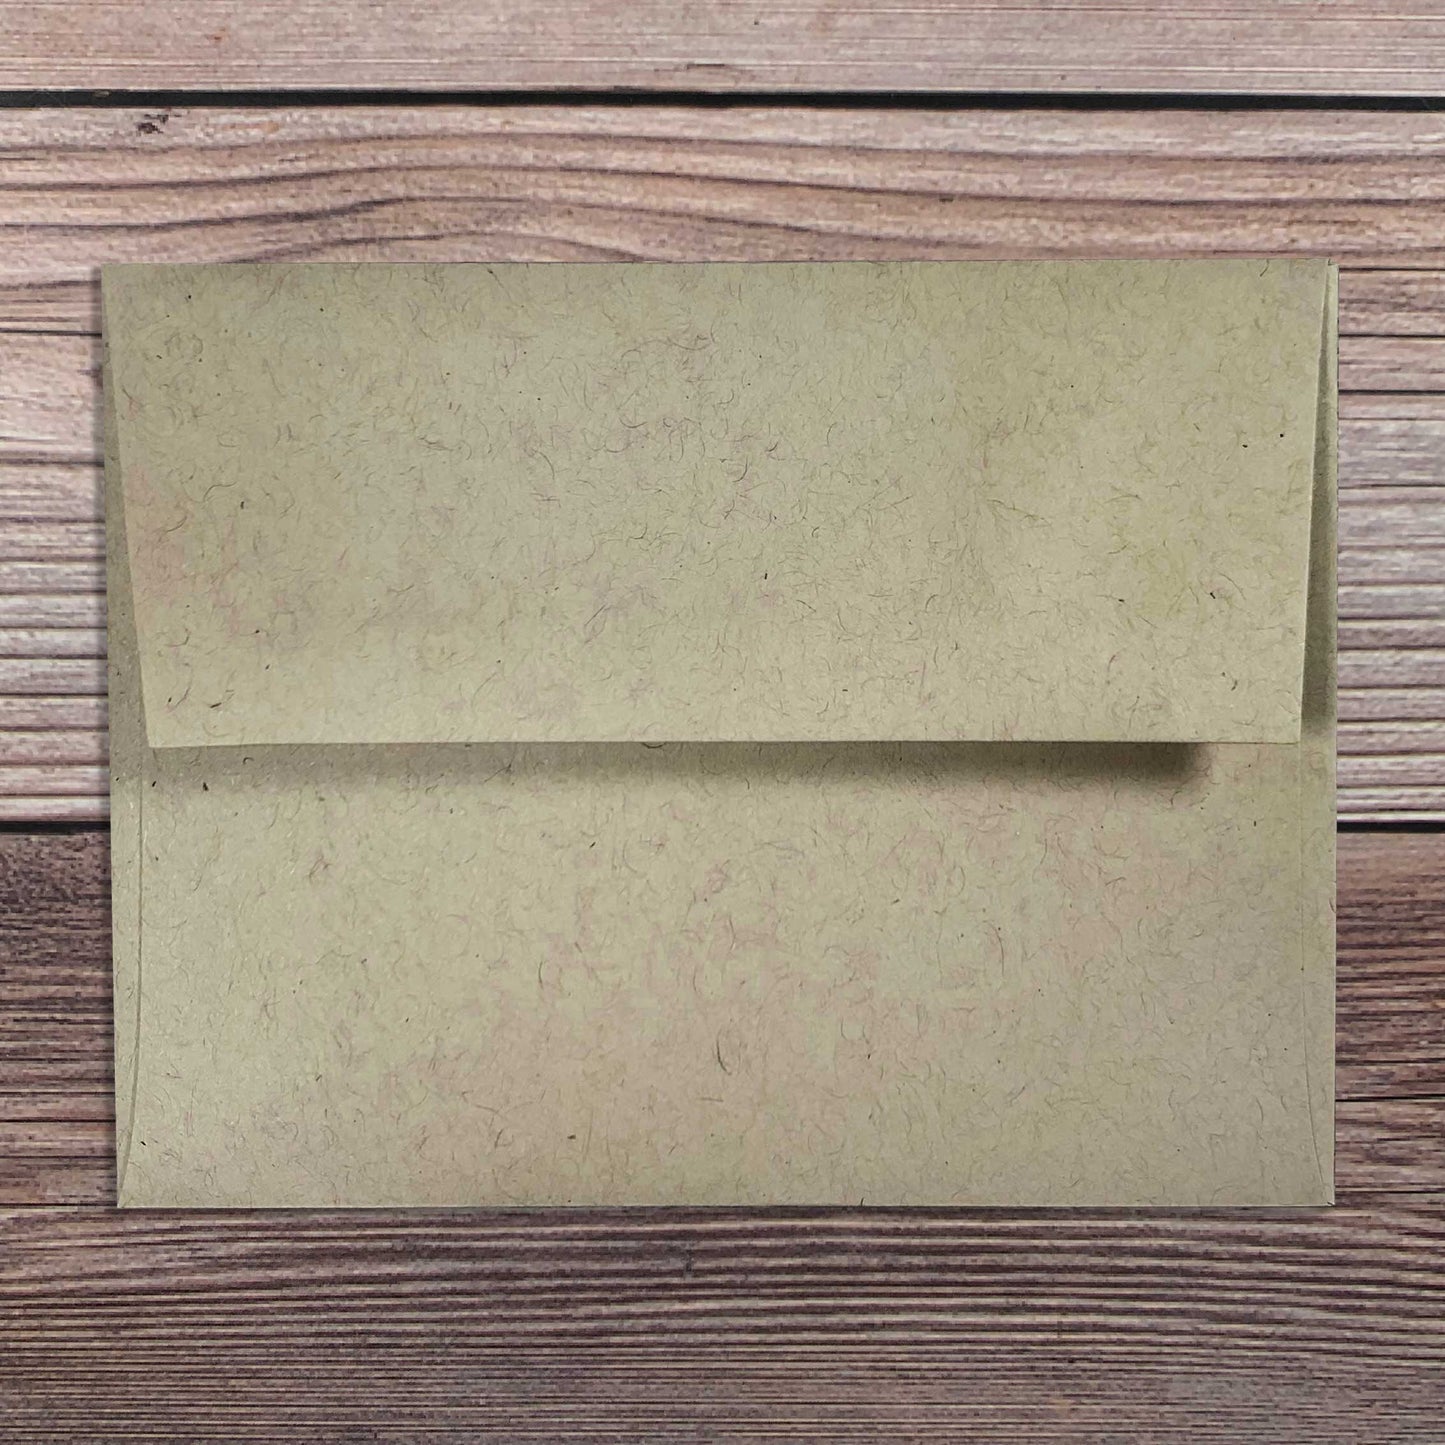 Greeting Card envelope, kraft color, square flap, included with letterpress Congratulations greeting card.